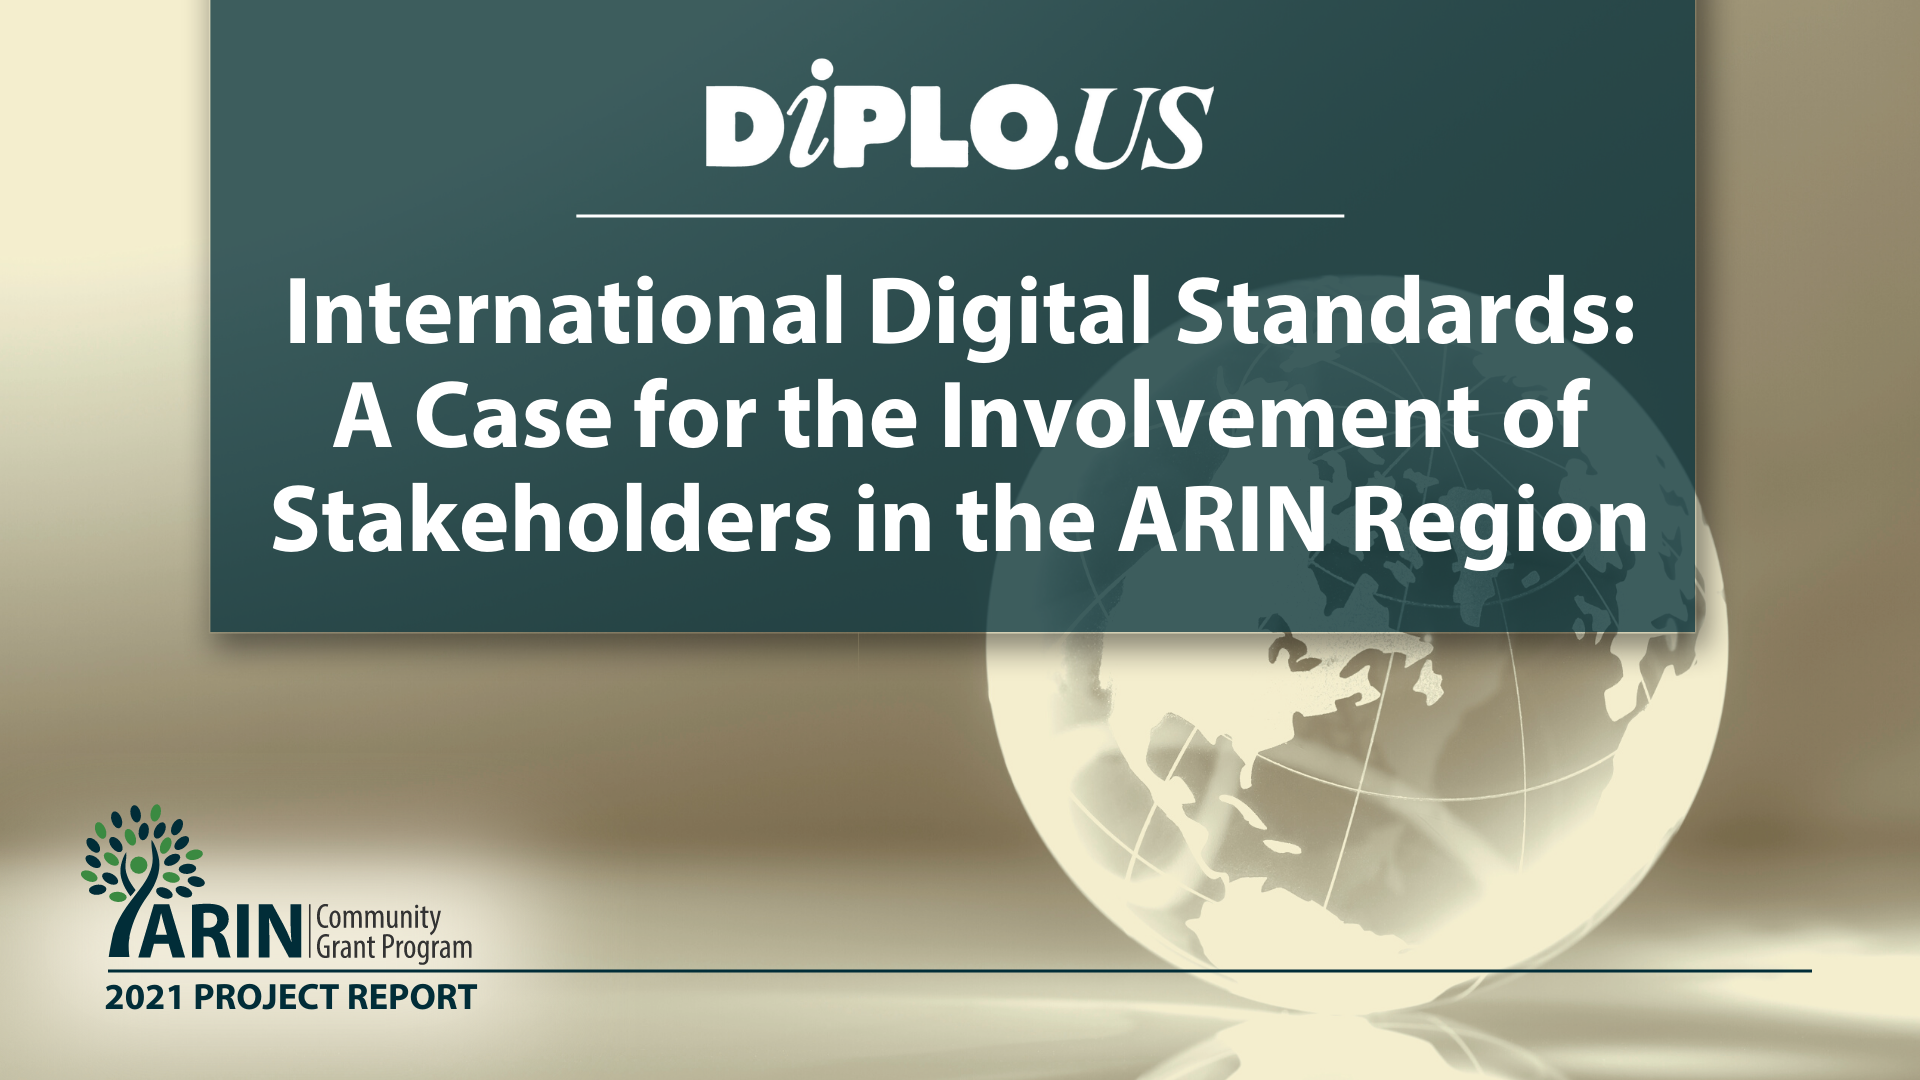 International Digital Standards: A Case for the Involvement of Actors in the ARIN Service Region